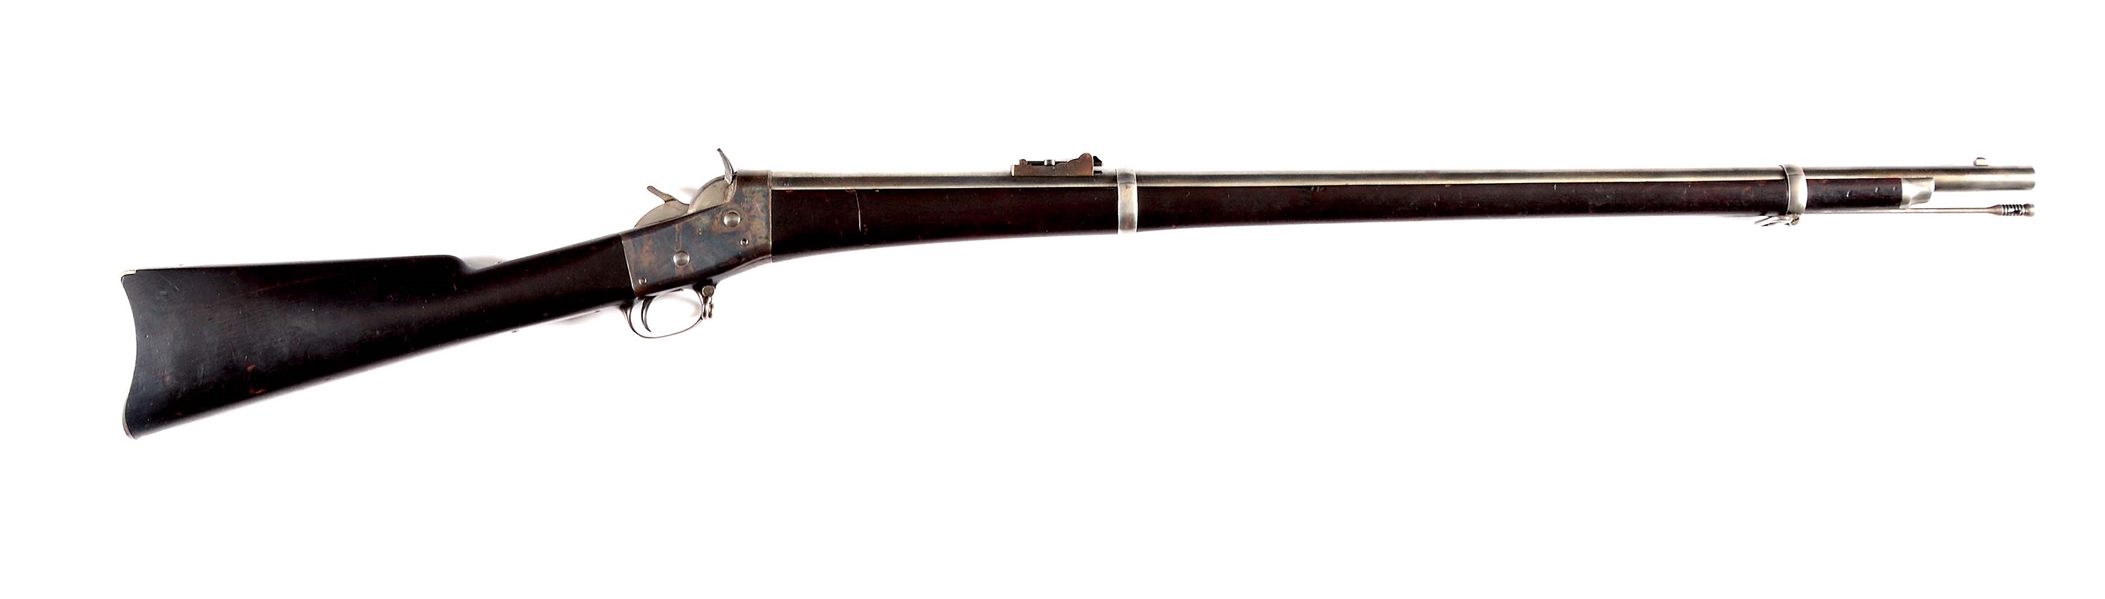 (A) EXTREMELY RARE AND FINE COLT LAIDLEY PROTOTYPE ROLLING BLOCK RIFLE.